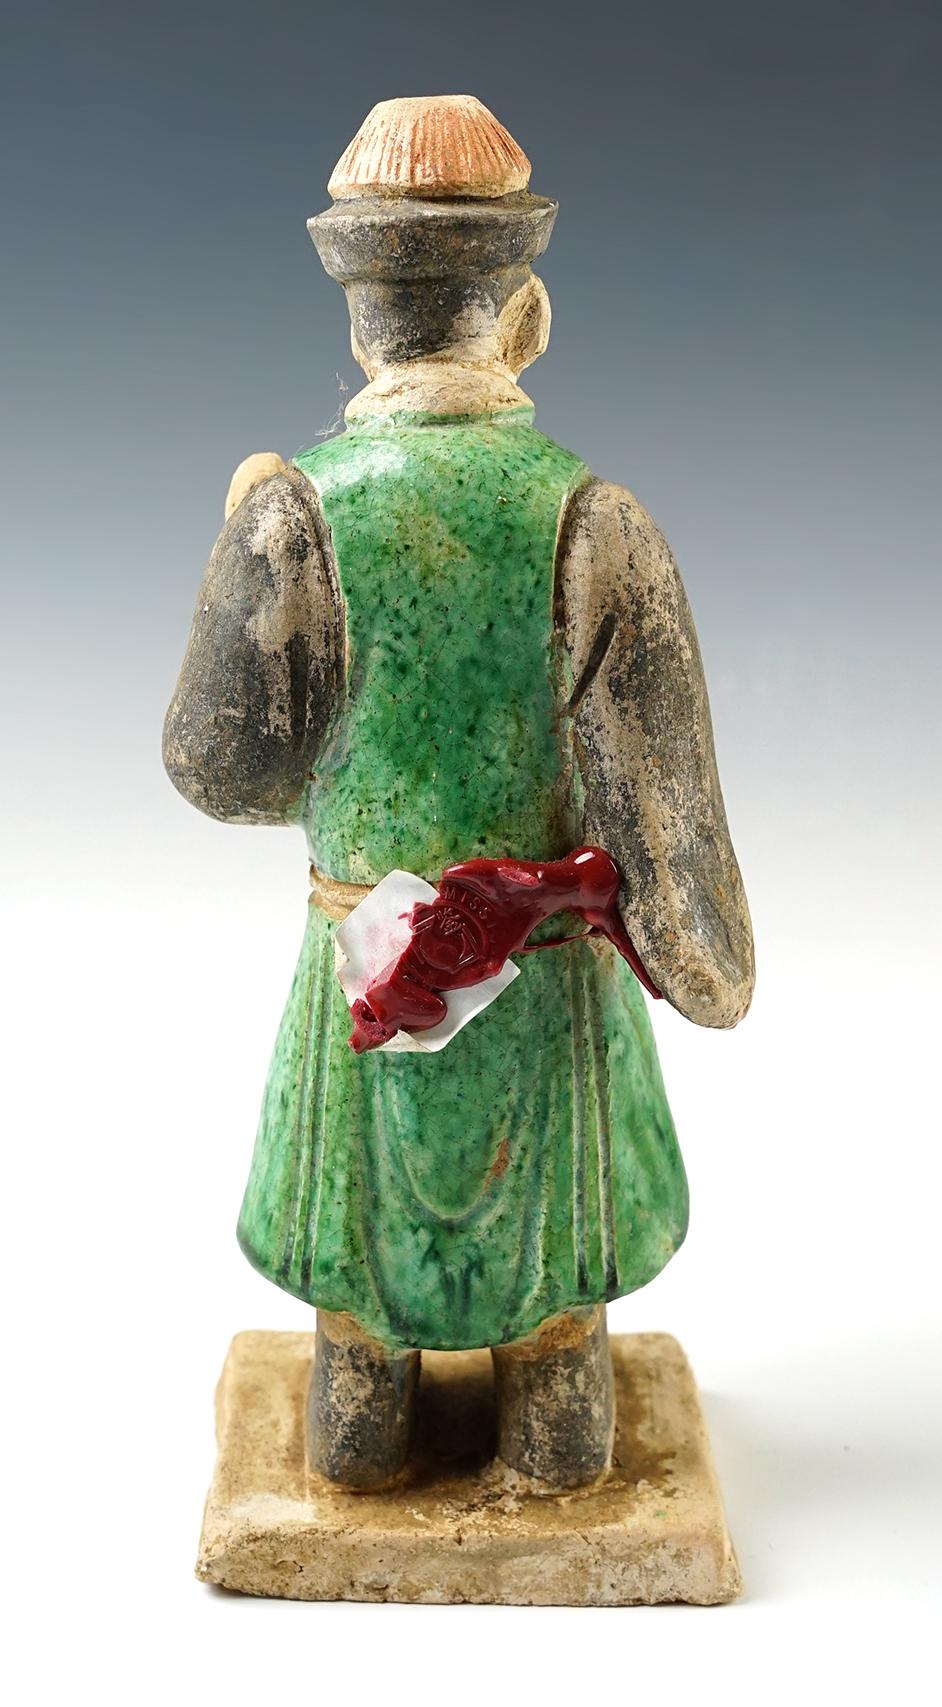 8 " tall Chinese male figure from the Tang Dynasty, cira A.D 618- 907. In excellent condition.